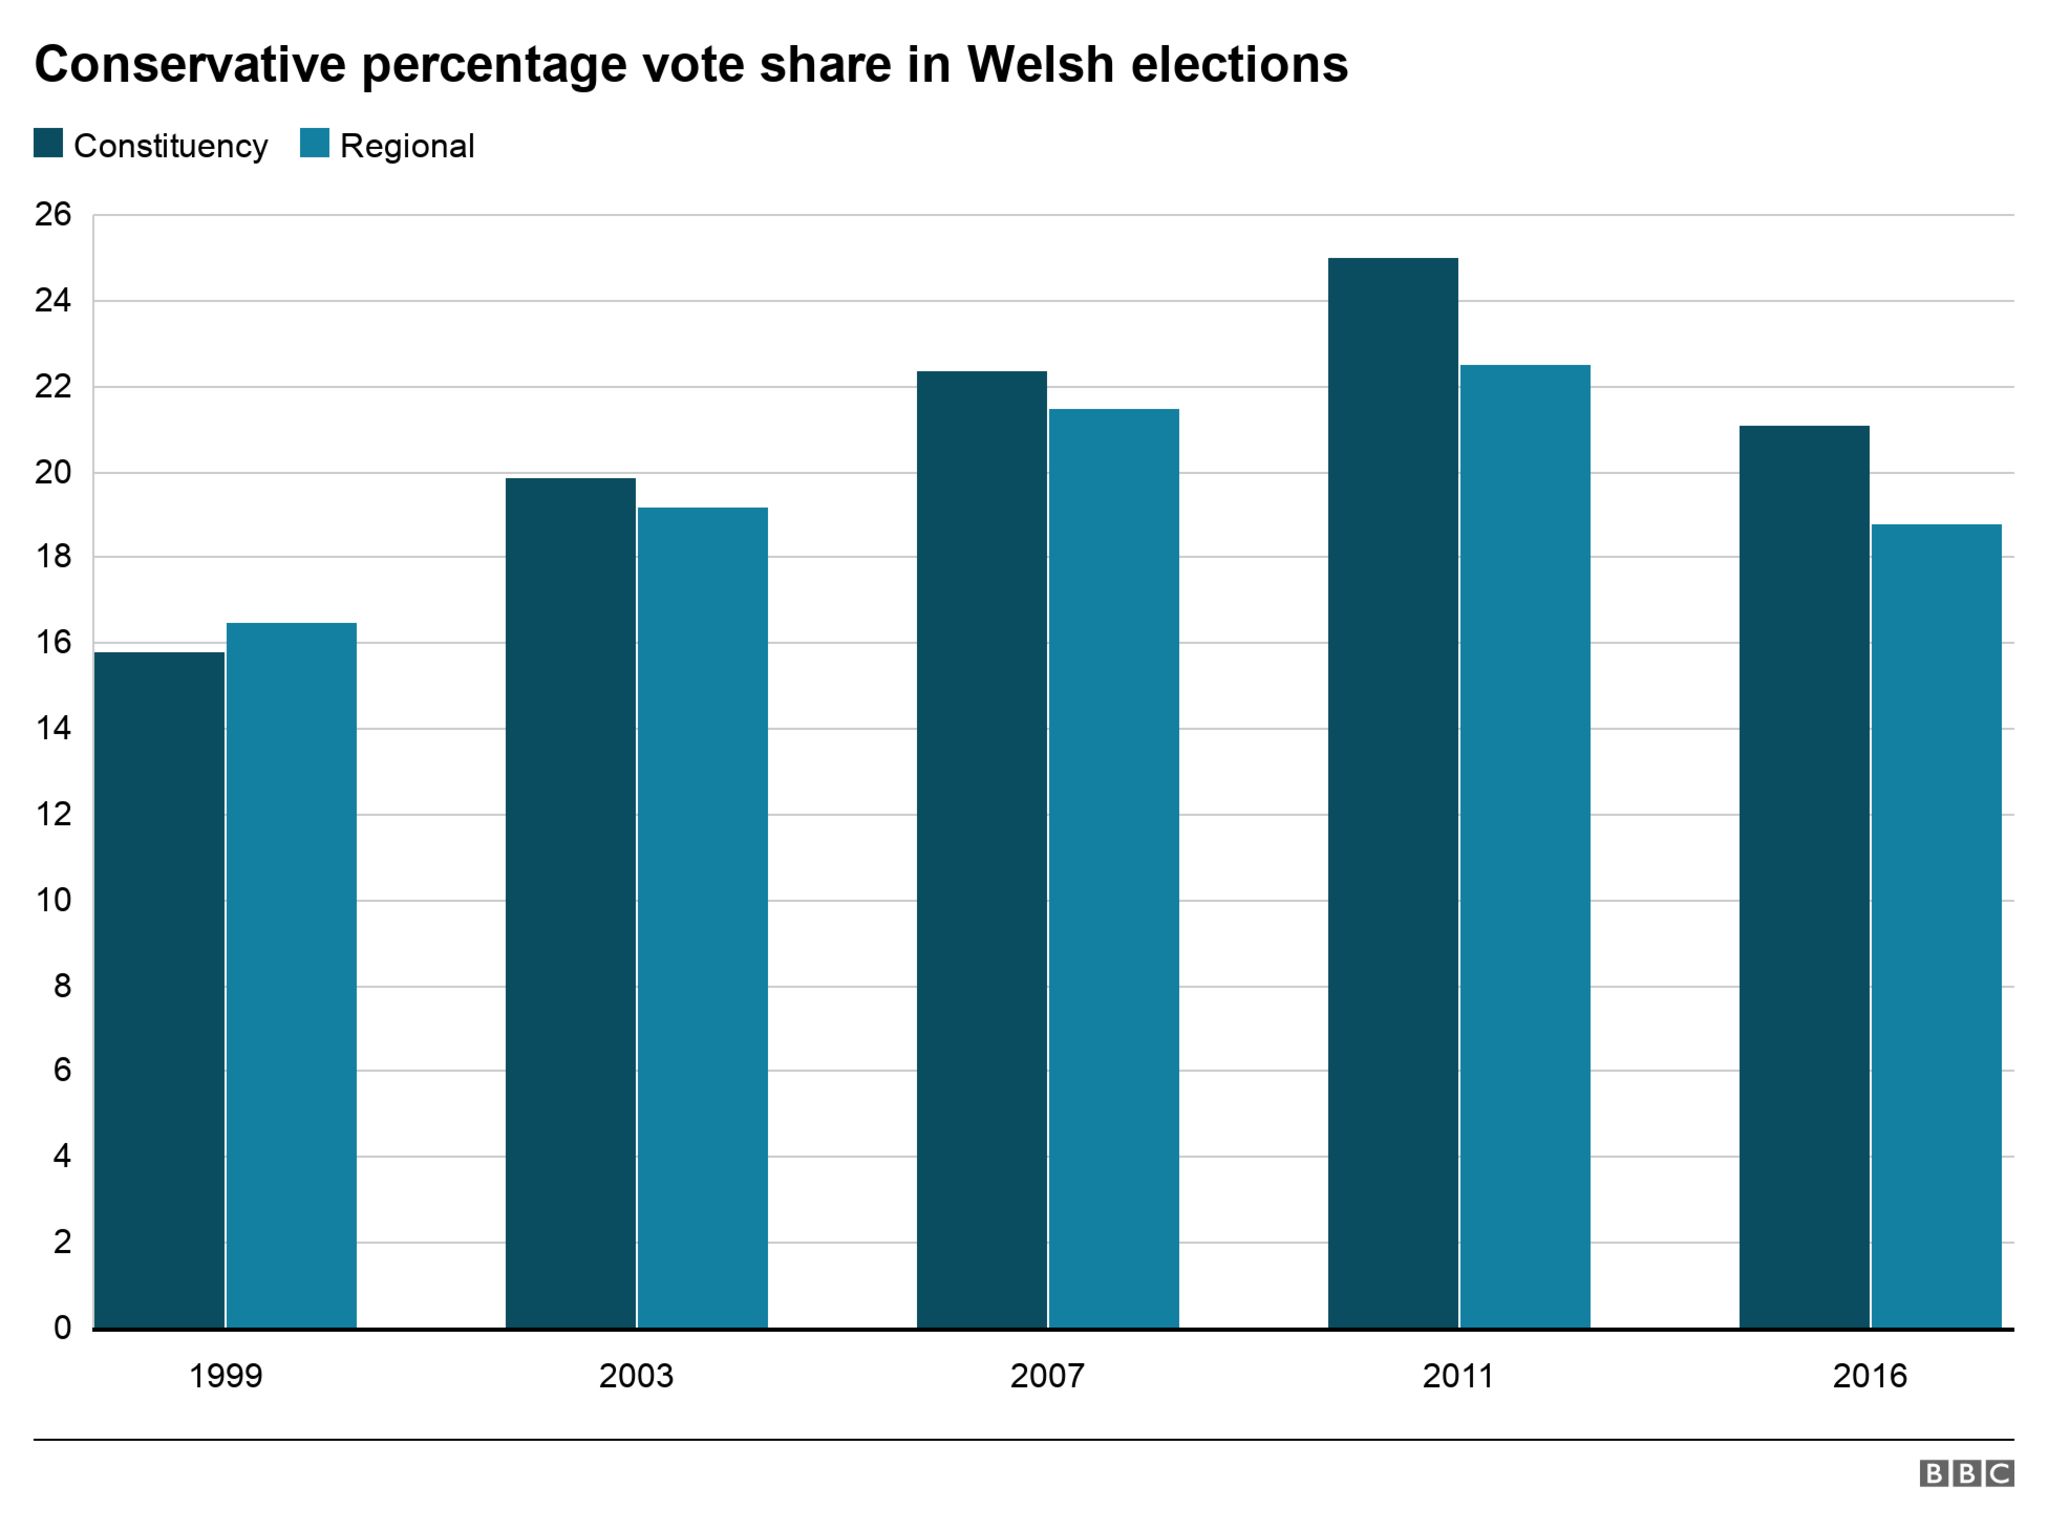 Graph showing Conservative percentage vote share in Welsh elections